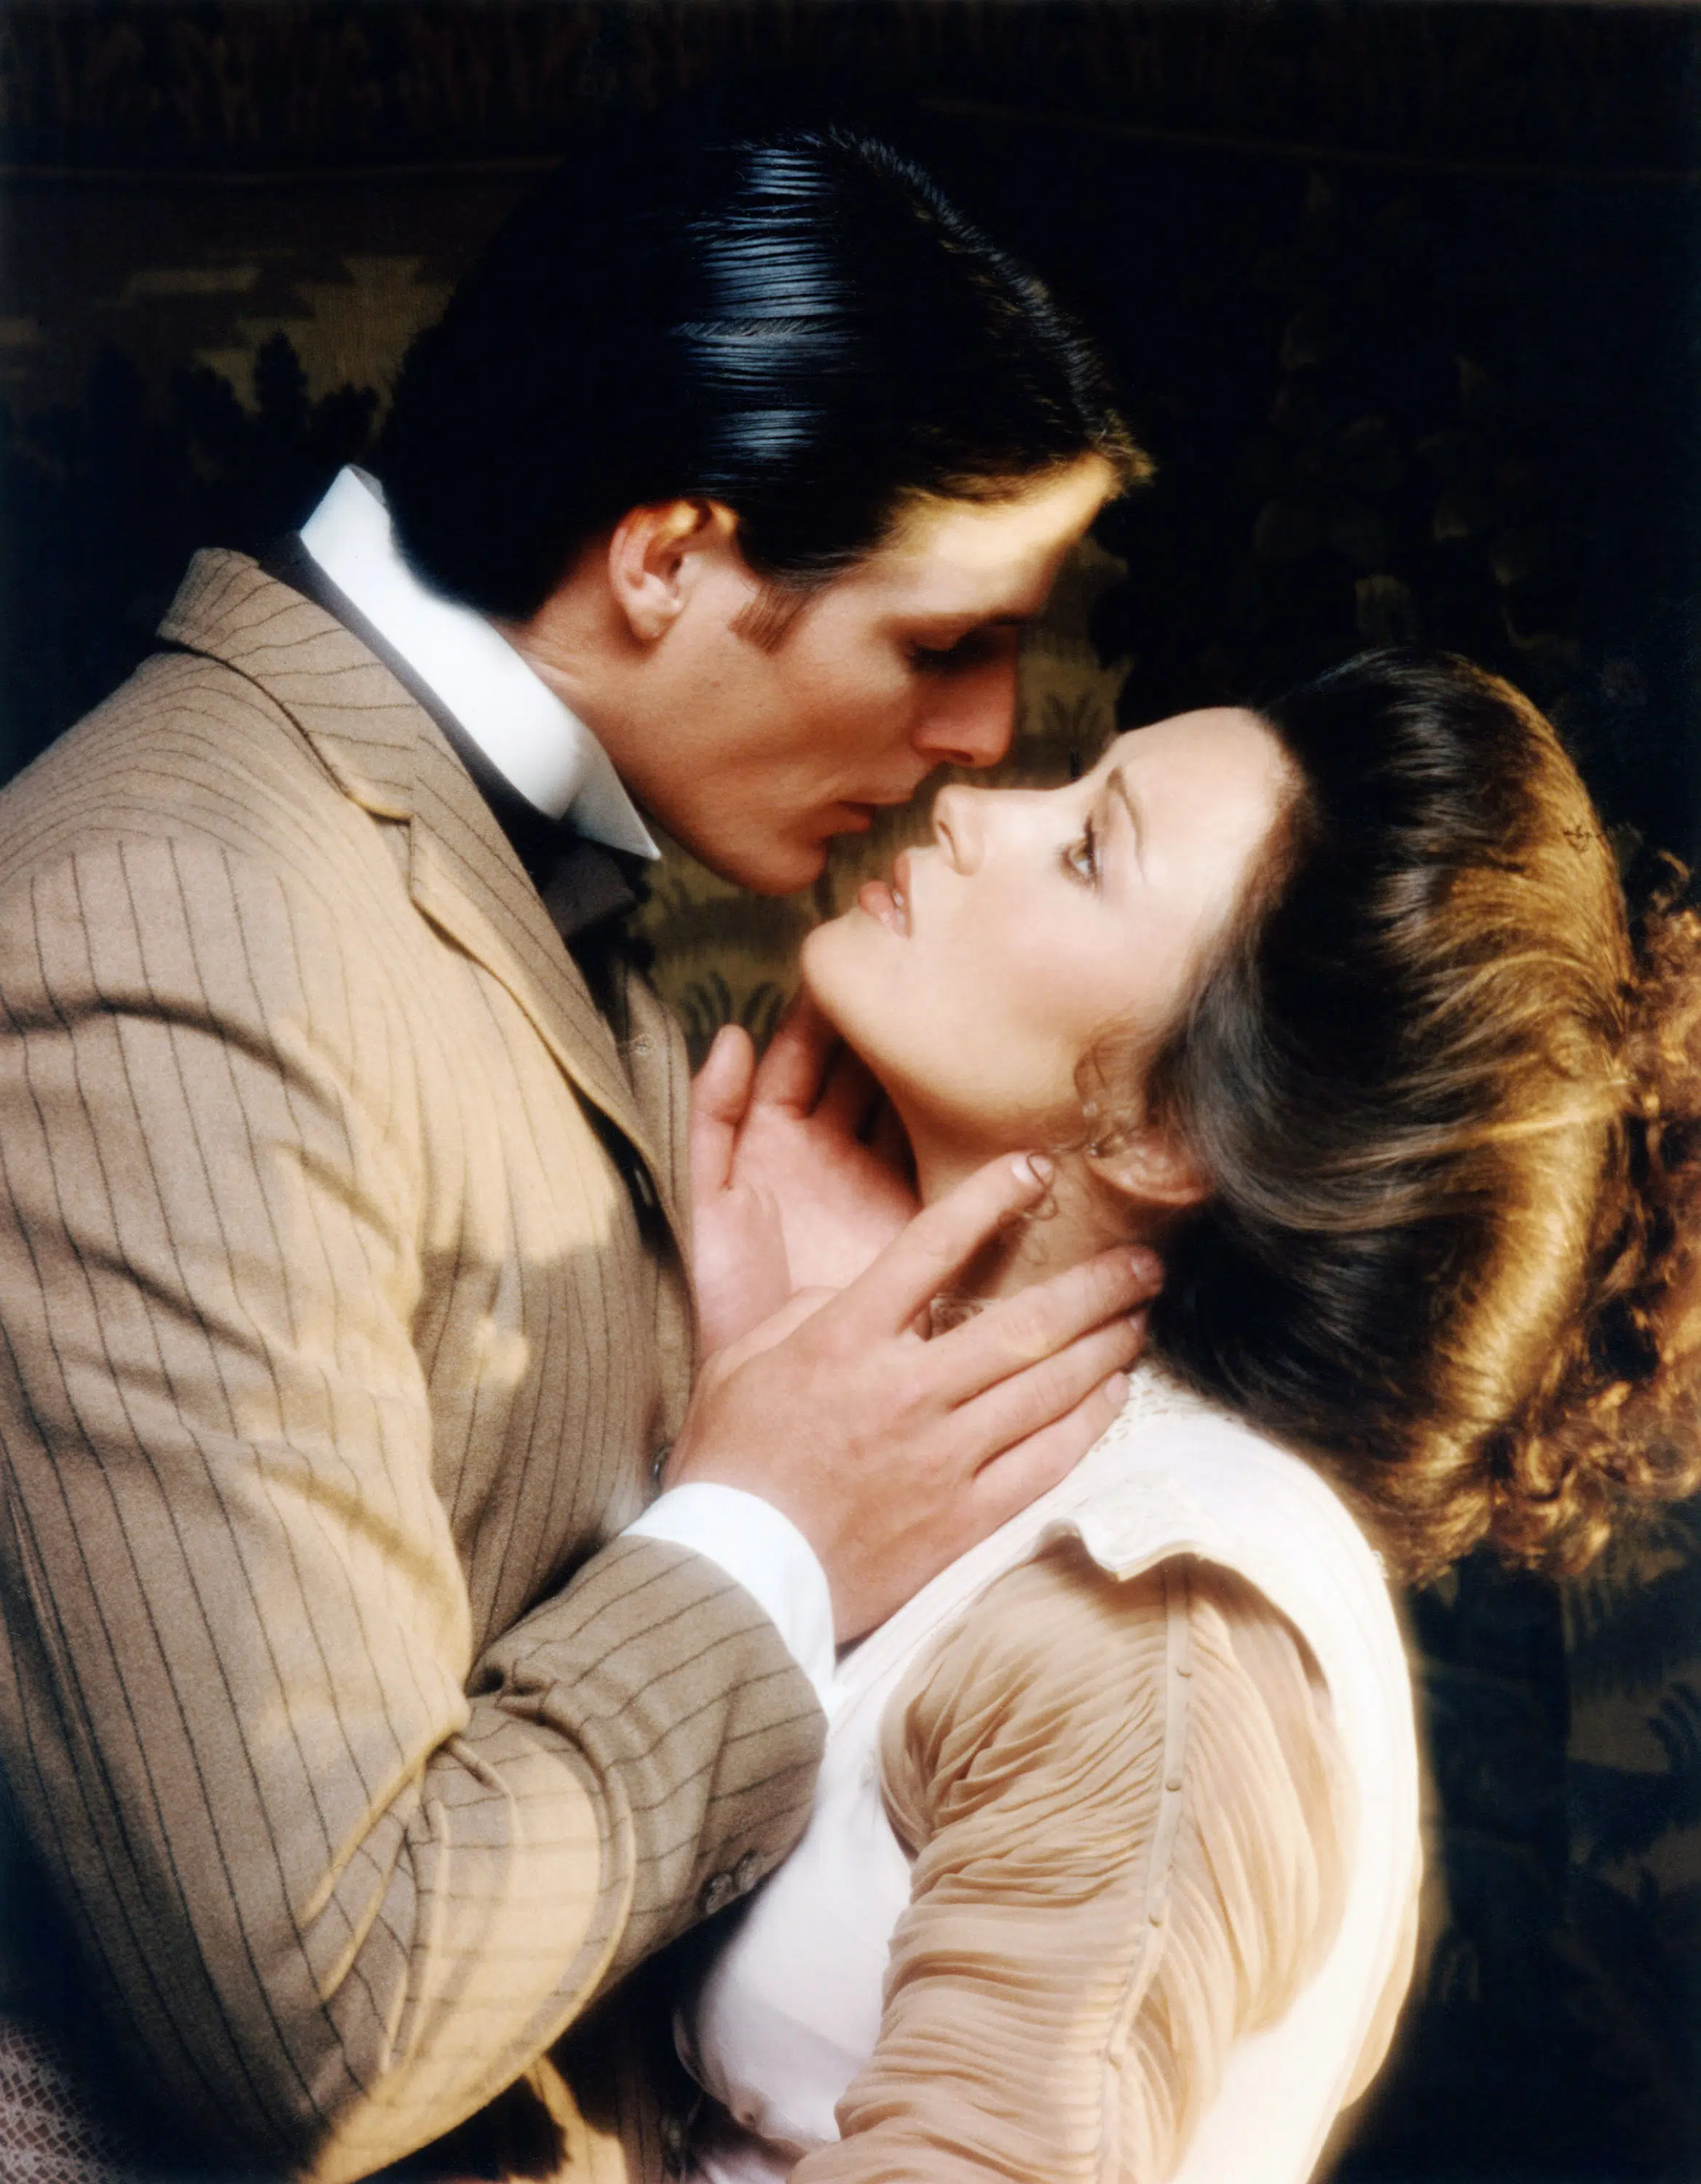 SOMEWHERE IN TIME, from left: Christopher Reeves, Jane Seymour, 1980